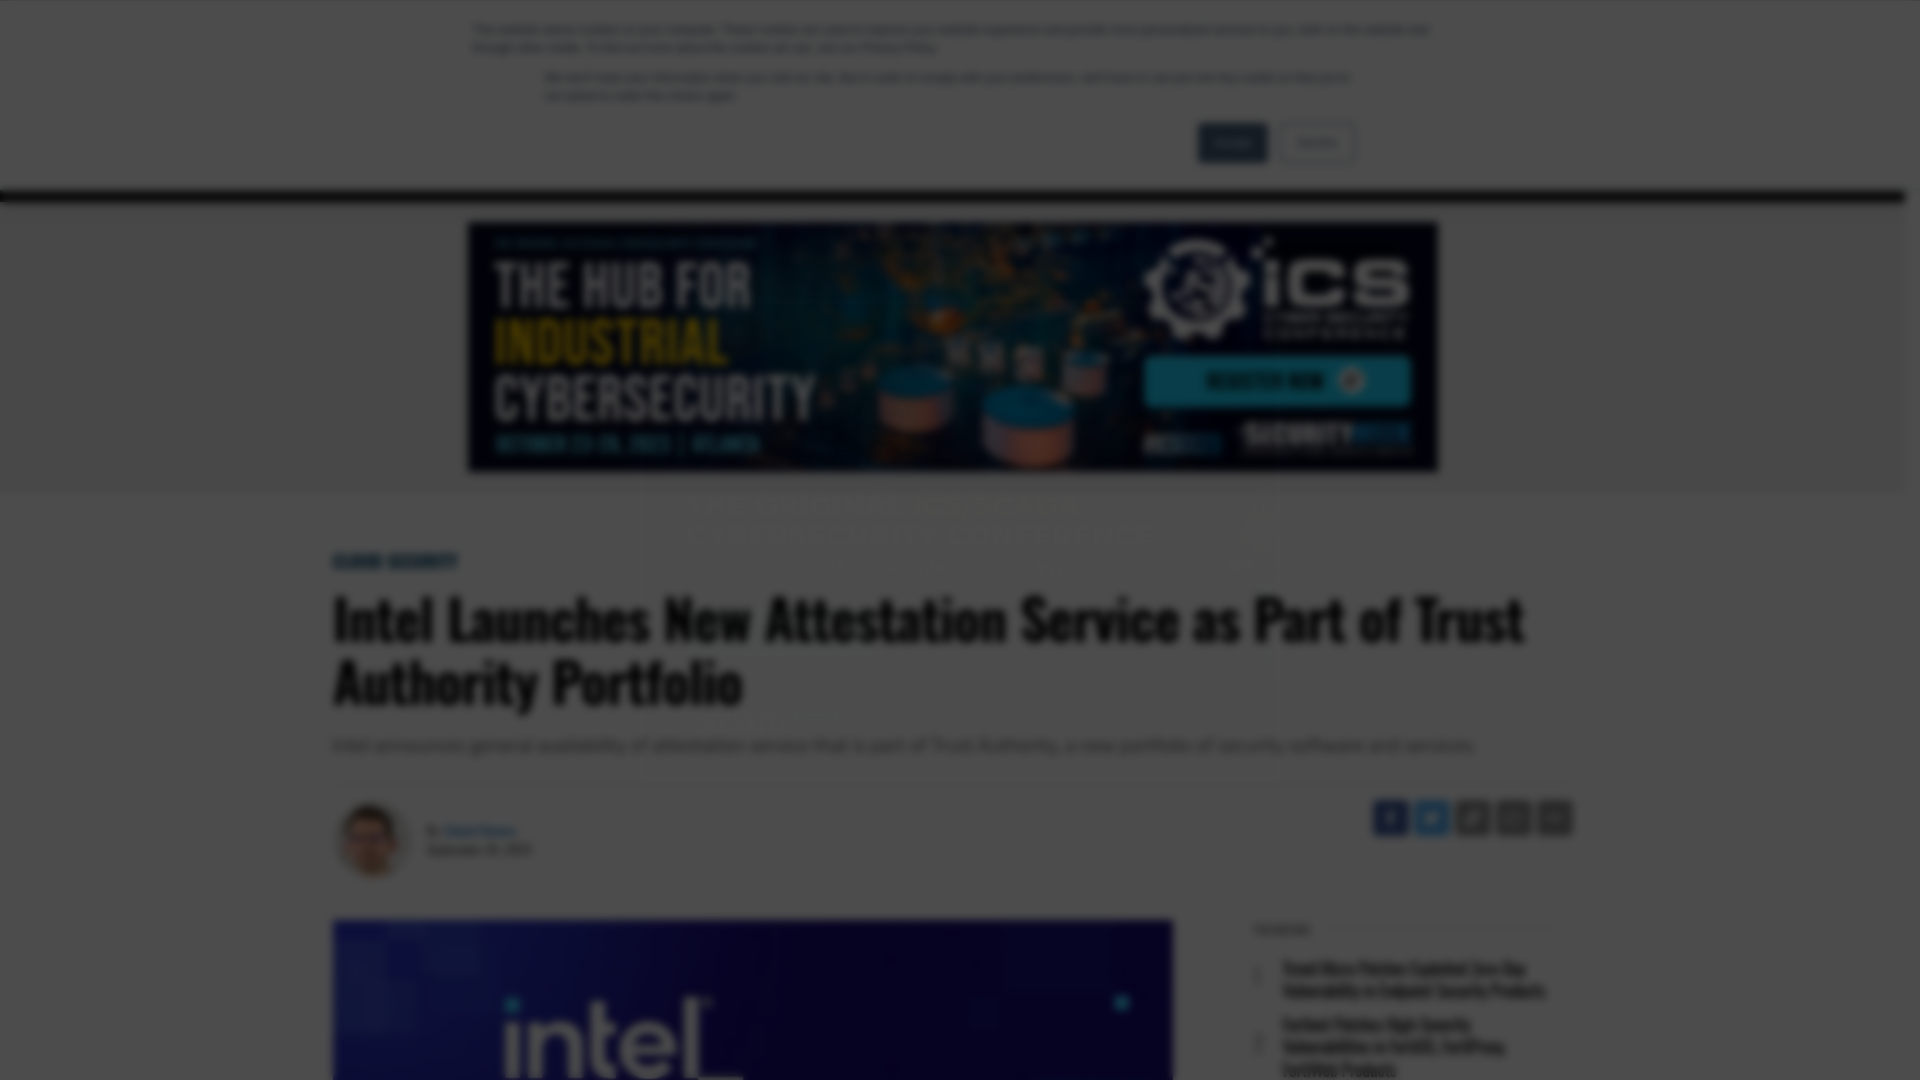 Intel Launches New Attestation Service as Part of Trust Authority Portfolio - SecurityWeek